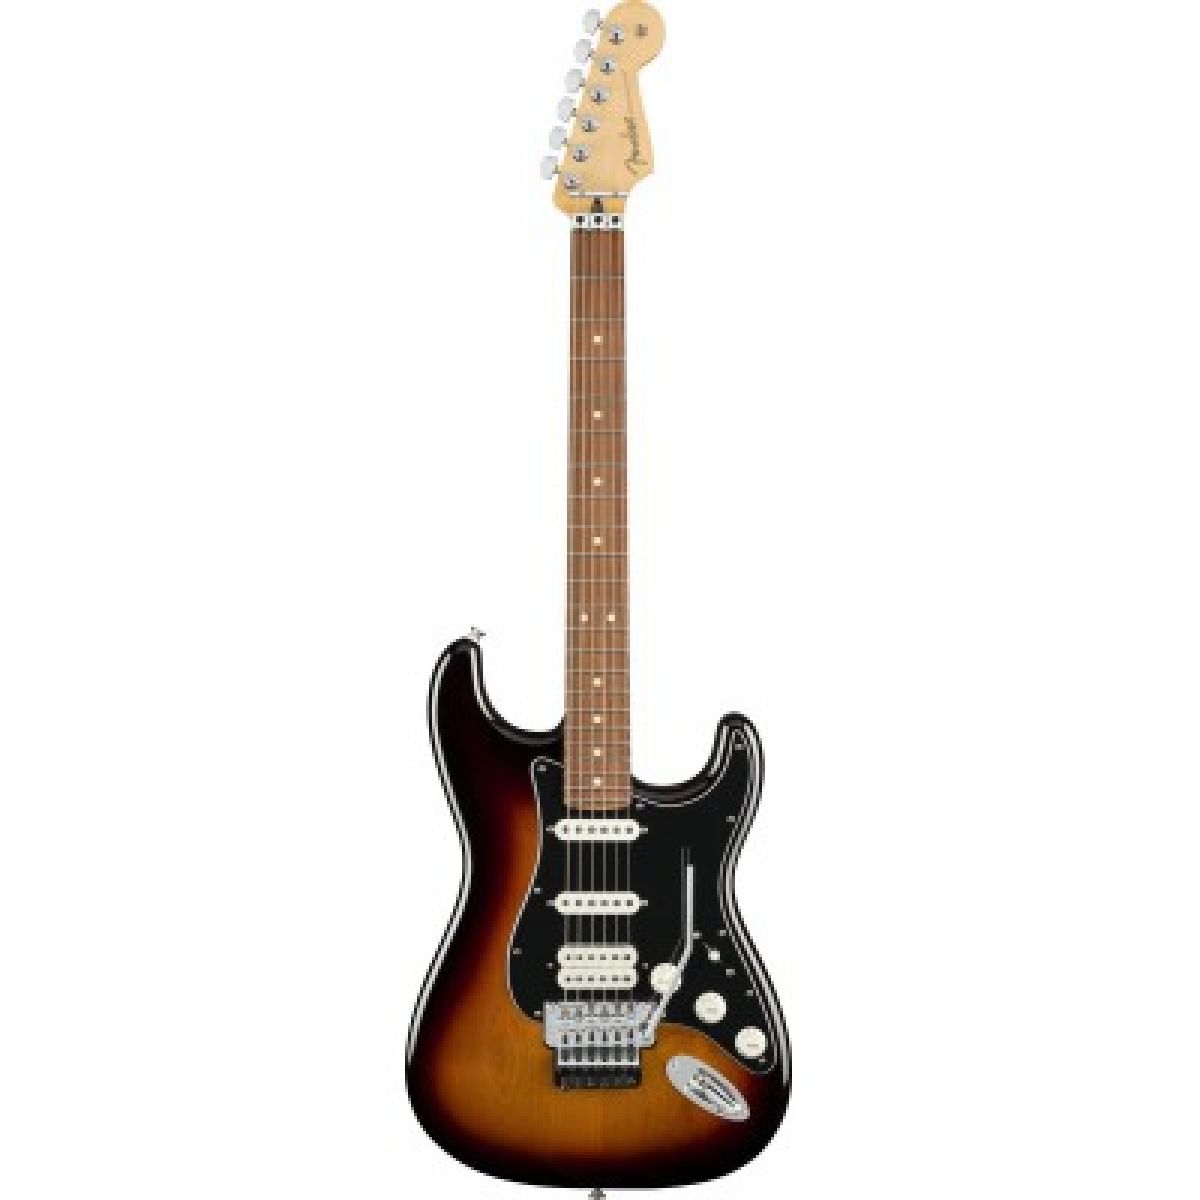 Fender Stratocaster Flyod rose serie  Type ST Droitier